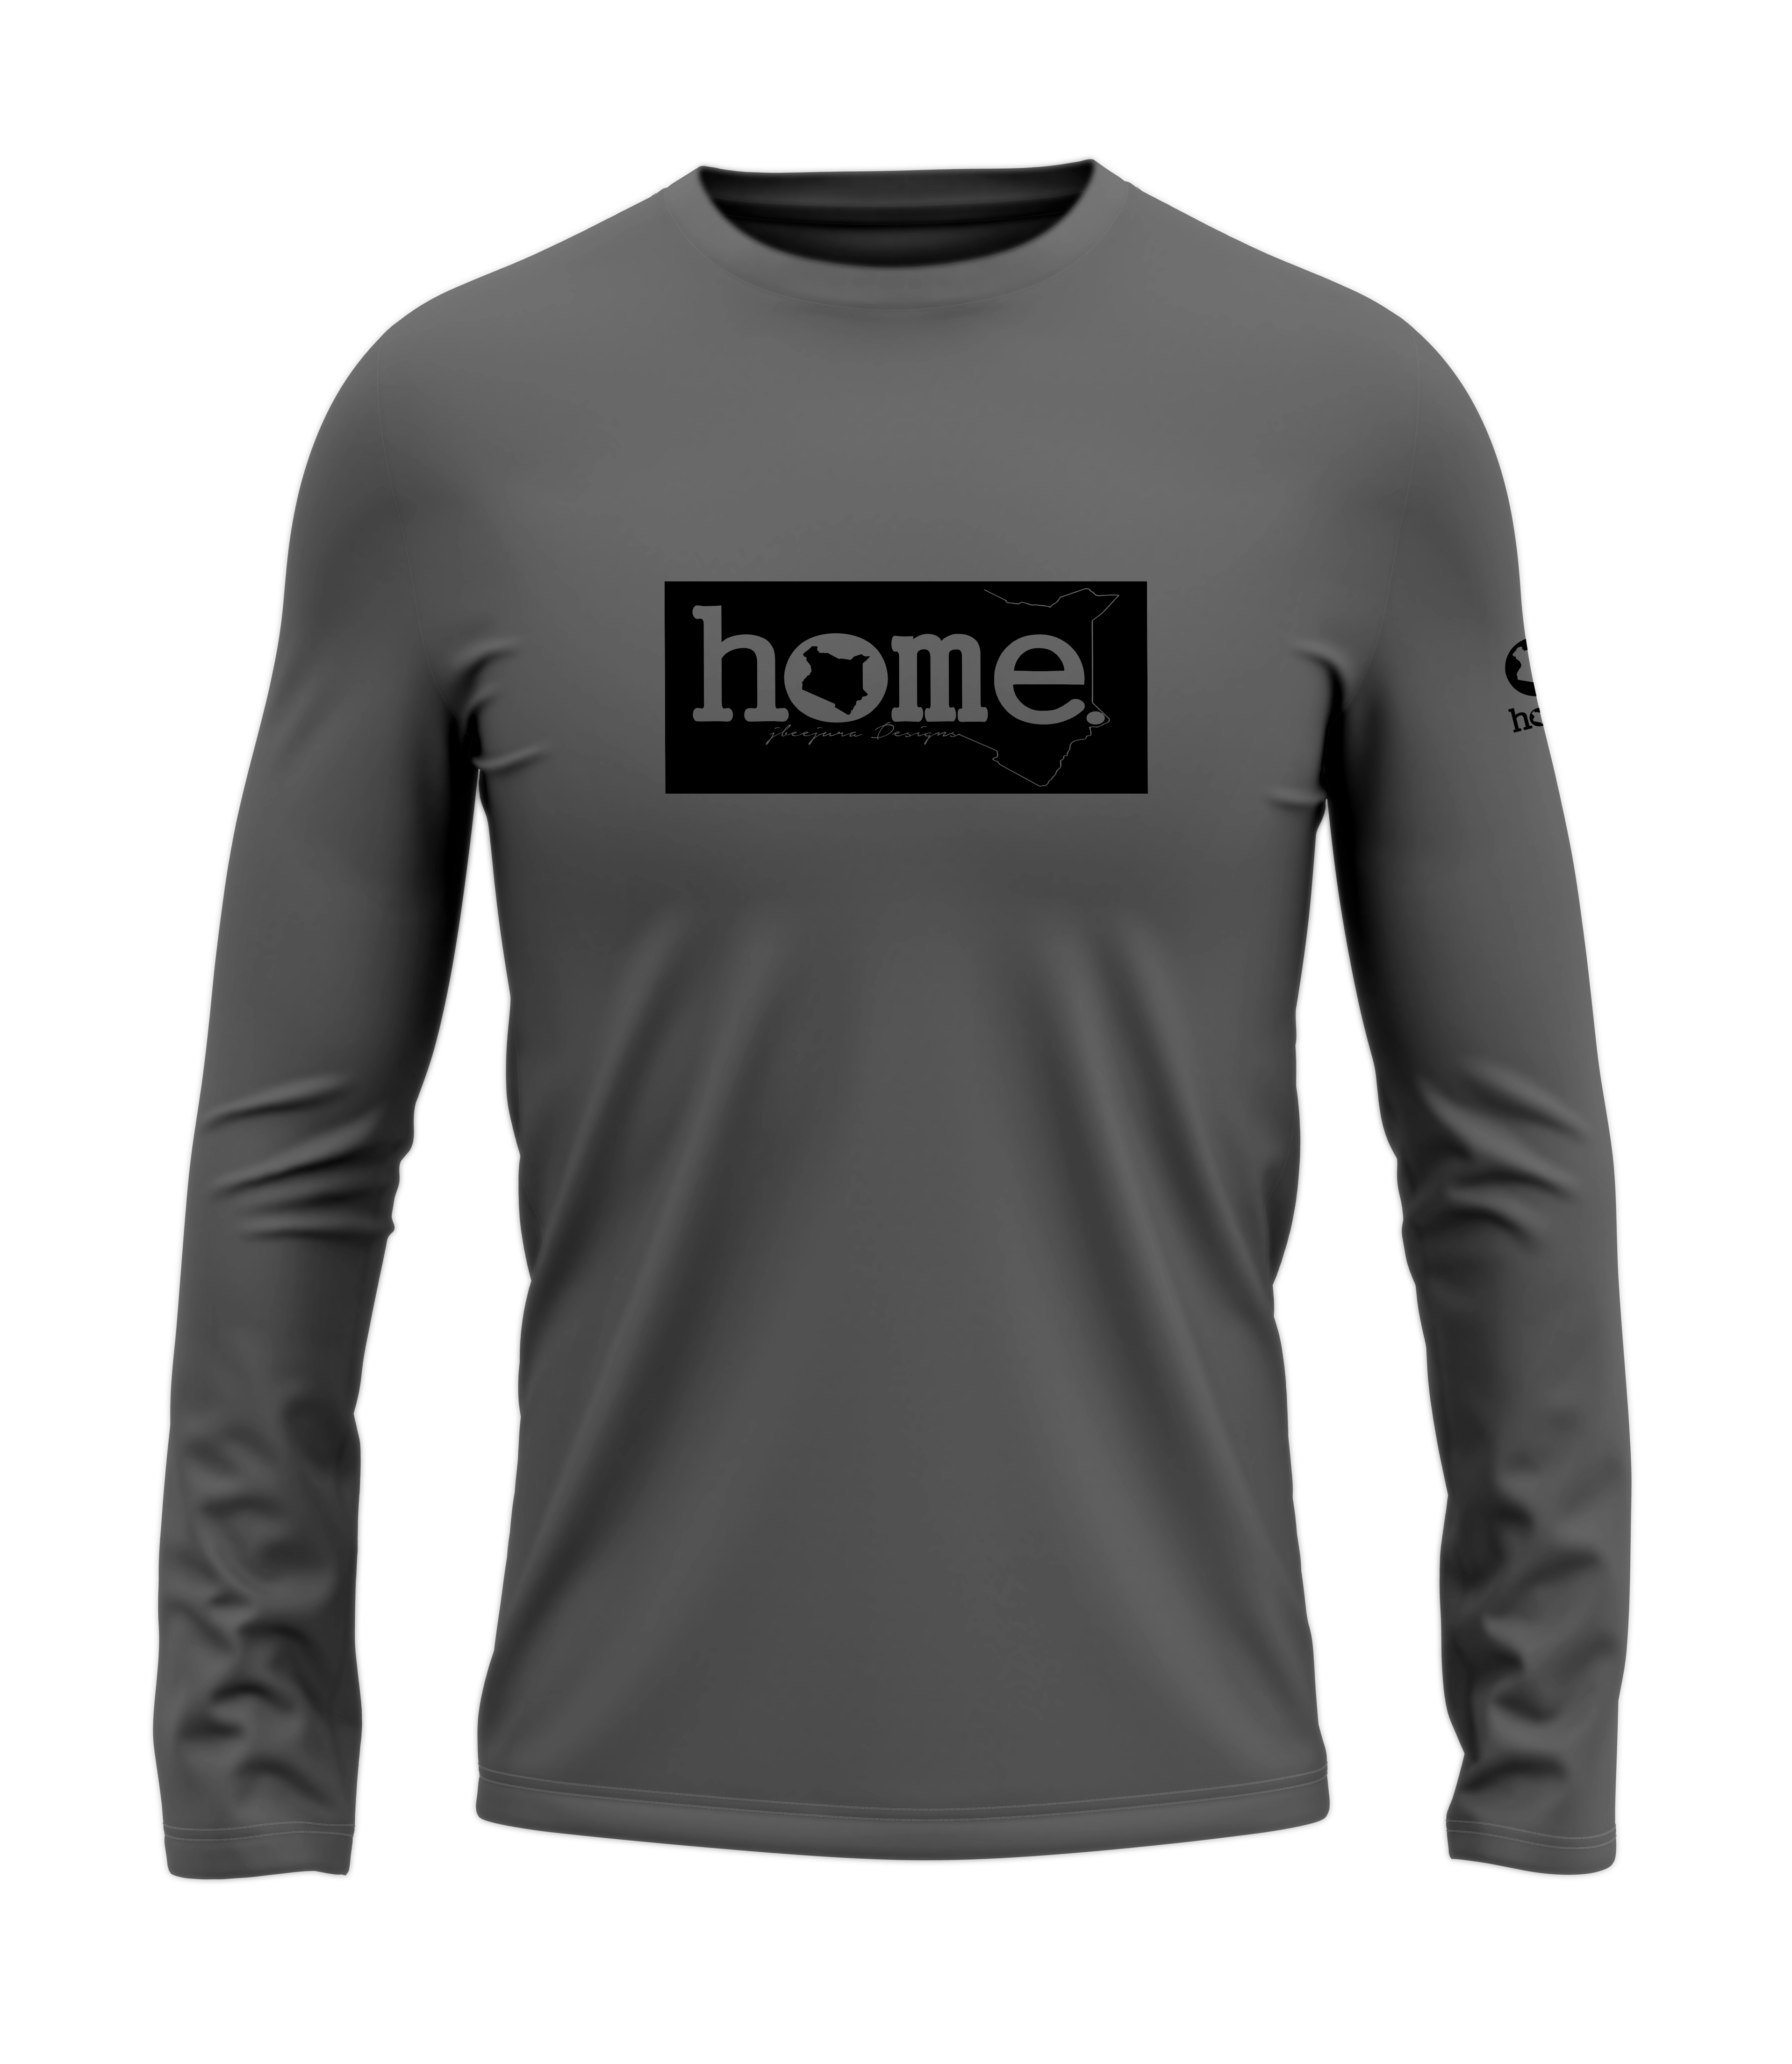 home_254 LONG-SLEEVED SAGE T-SHIRT WITH A BLACK CLASSIC PRINT – COTTON PLUS FABRIC